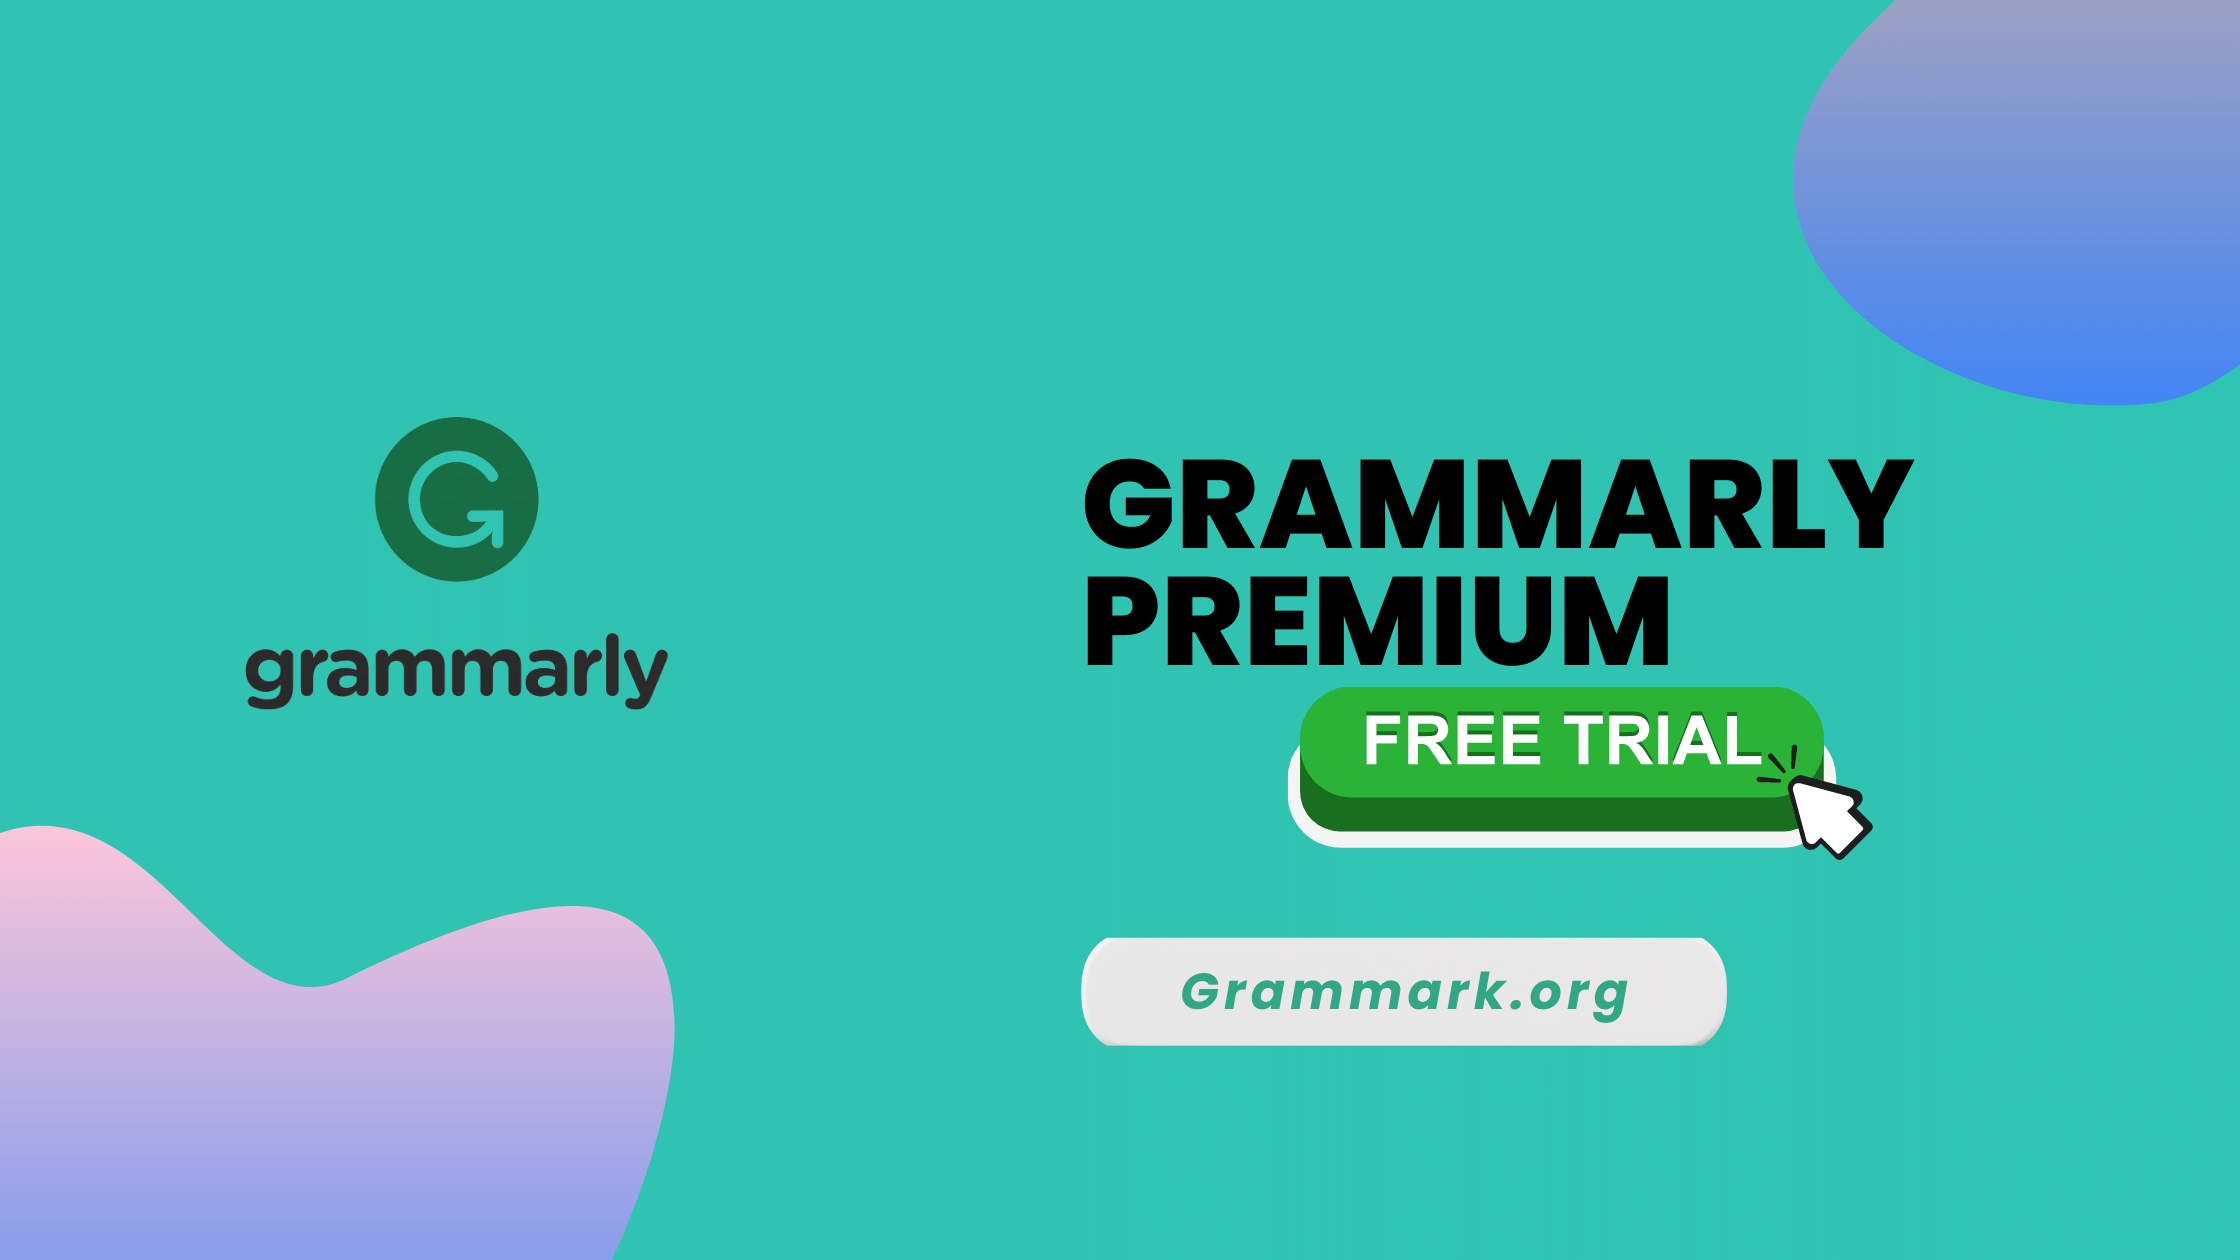 7 ay free trial for grammarly